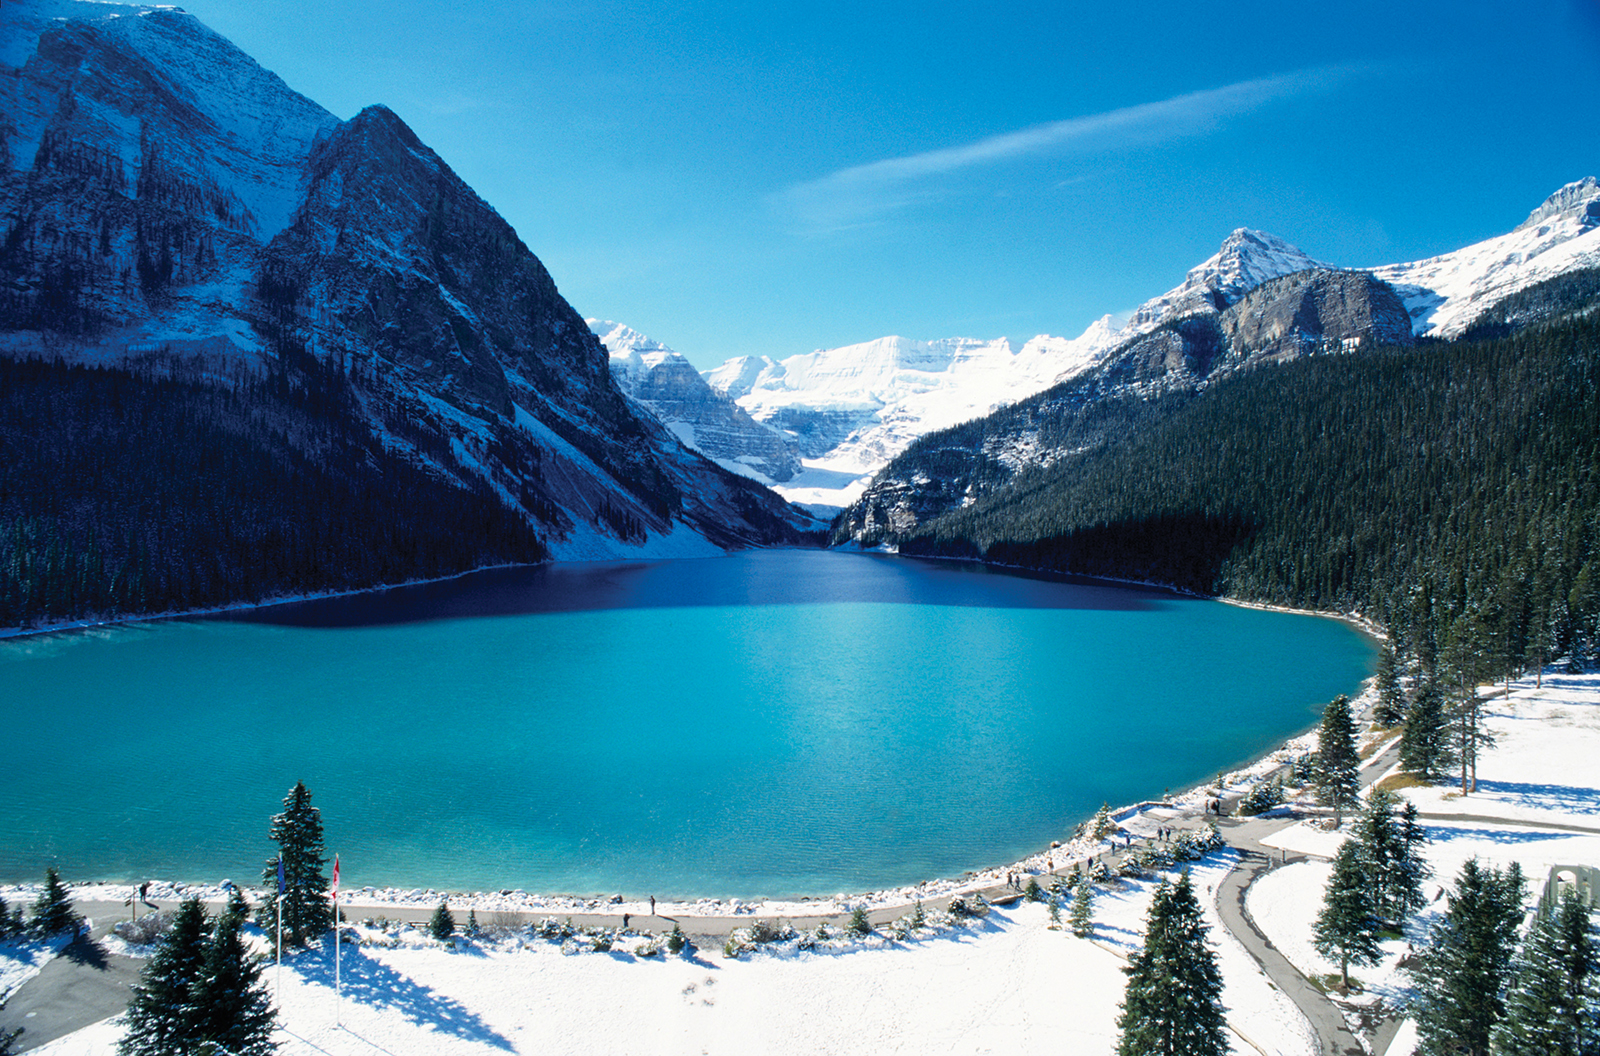 Plan a Trip to Canada and We’ll Reveal Which Dog Breed Suits You the Best Lake Louise Columbia Glacier, Banff National Park, Canada